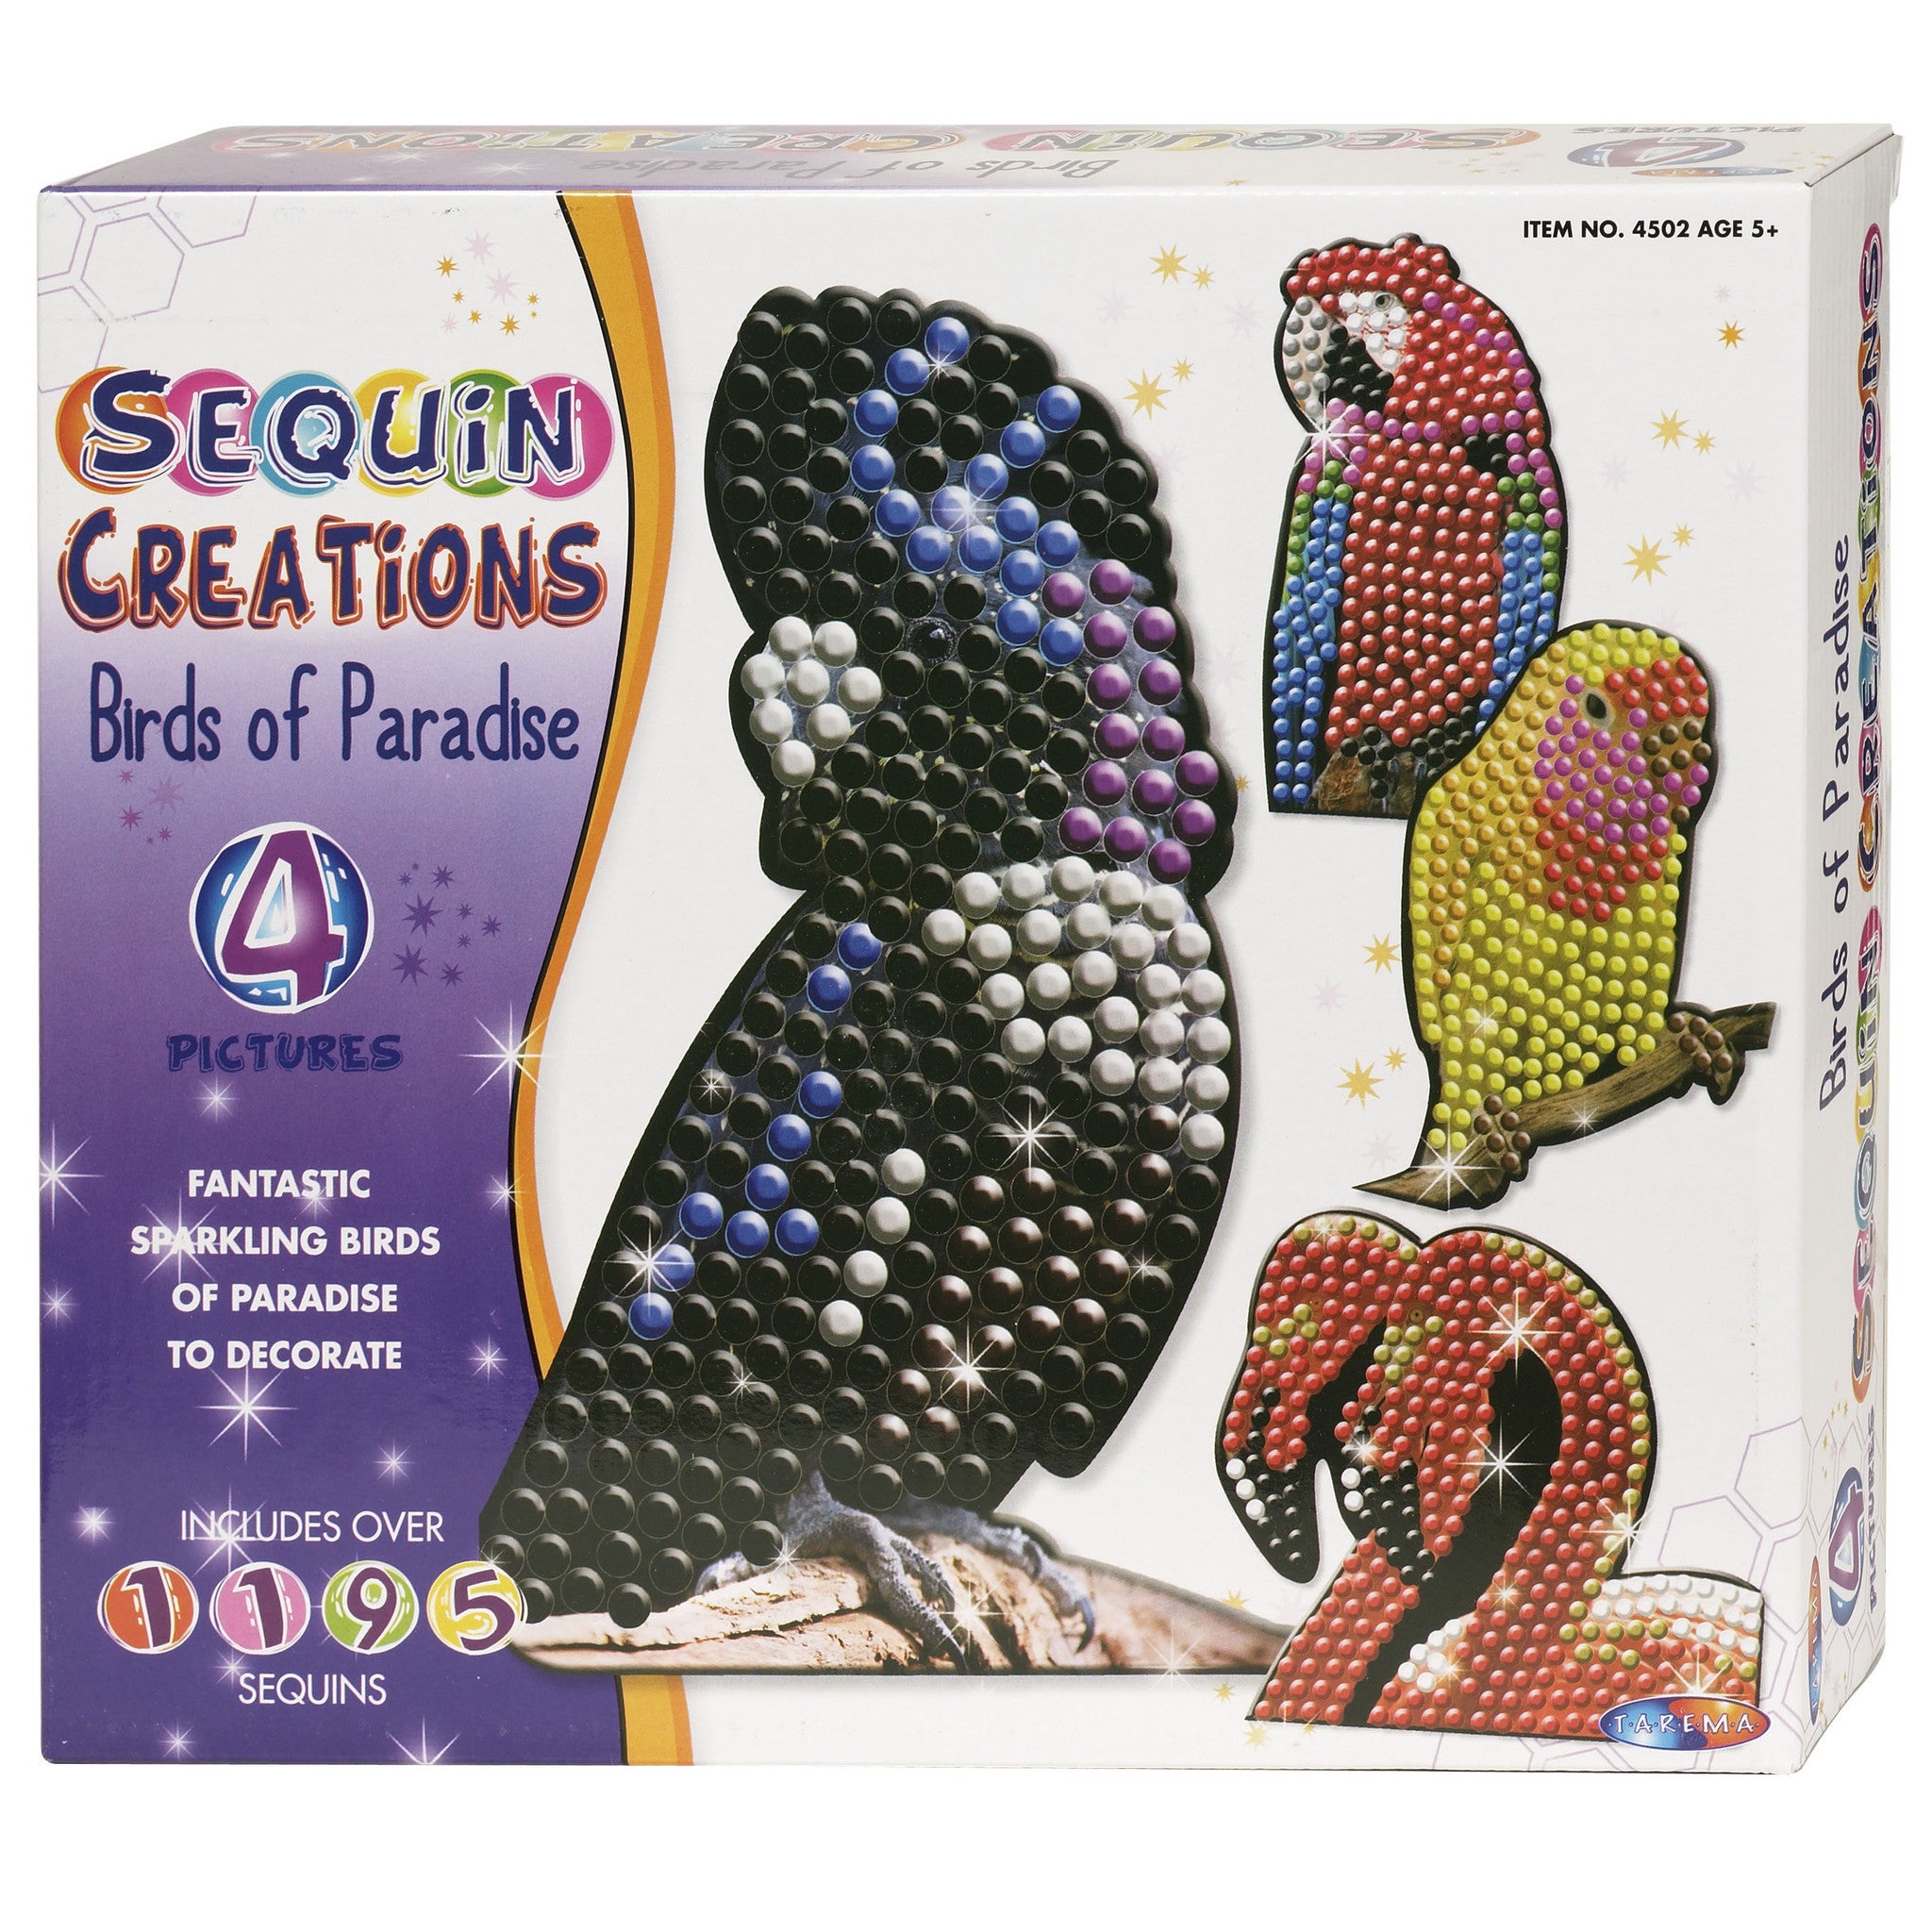 Sequin Creations - Birds of Paradise